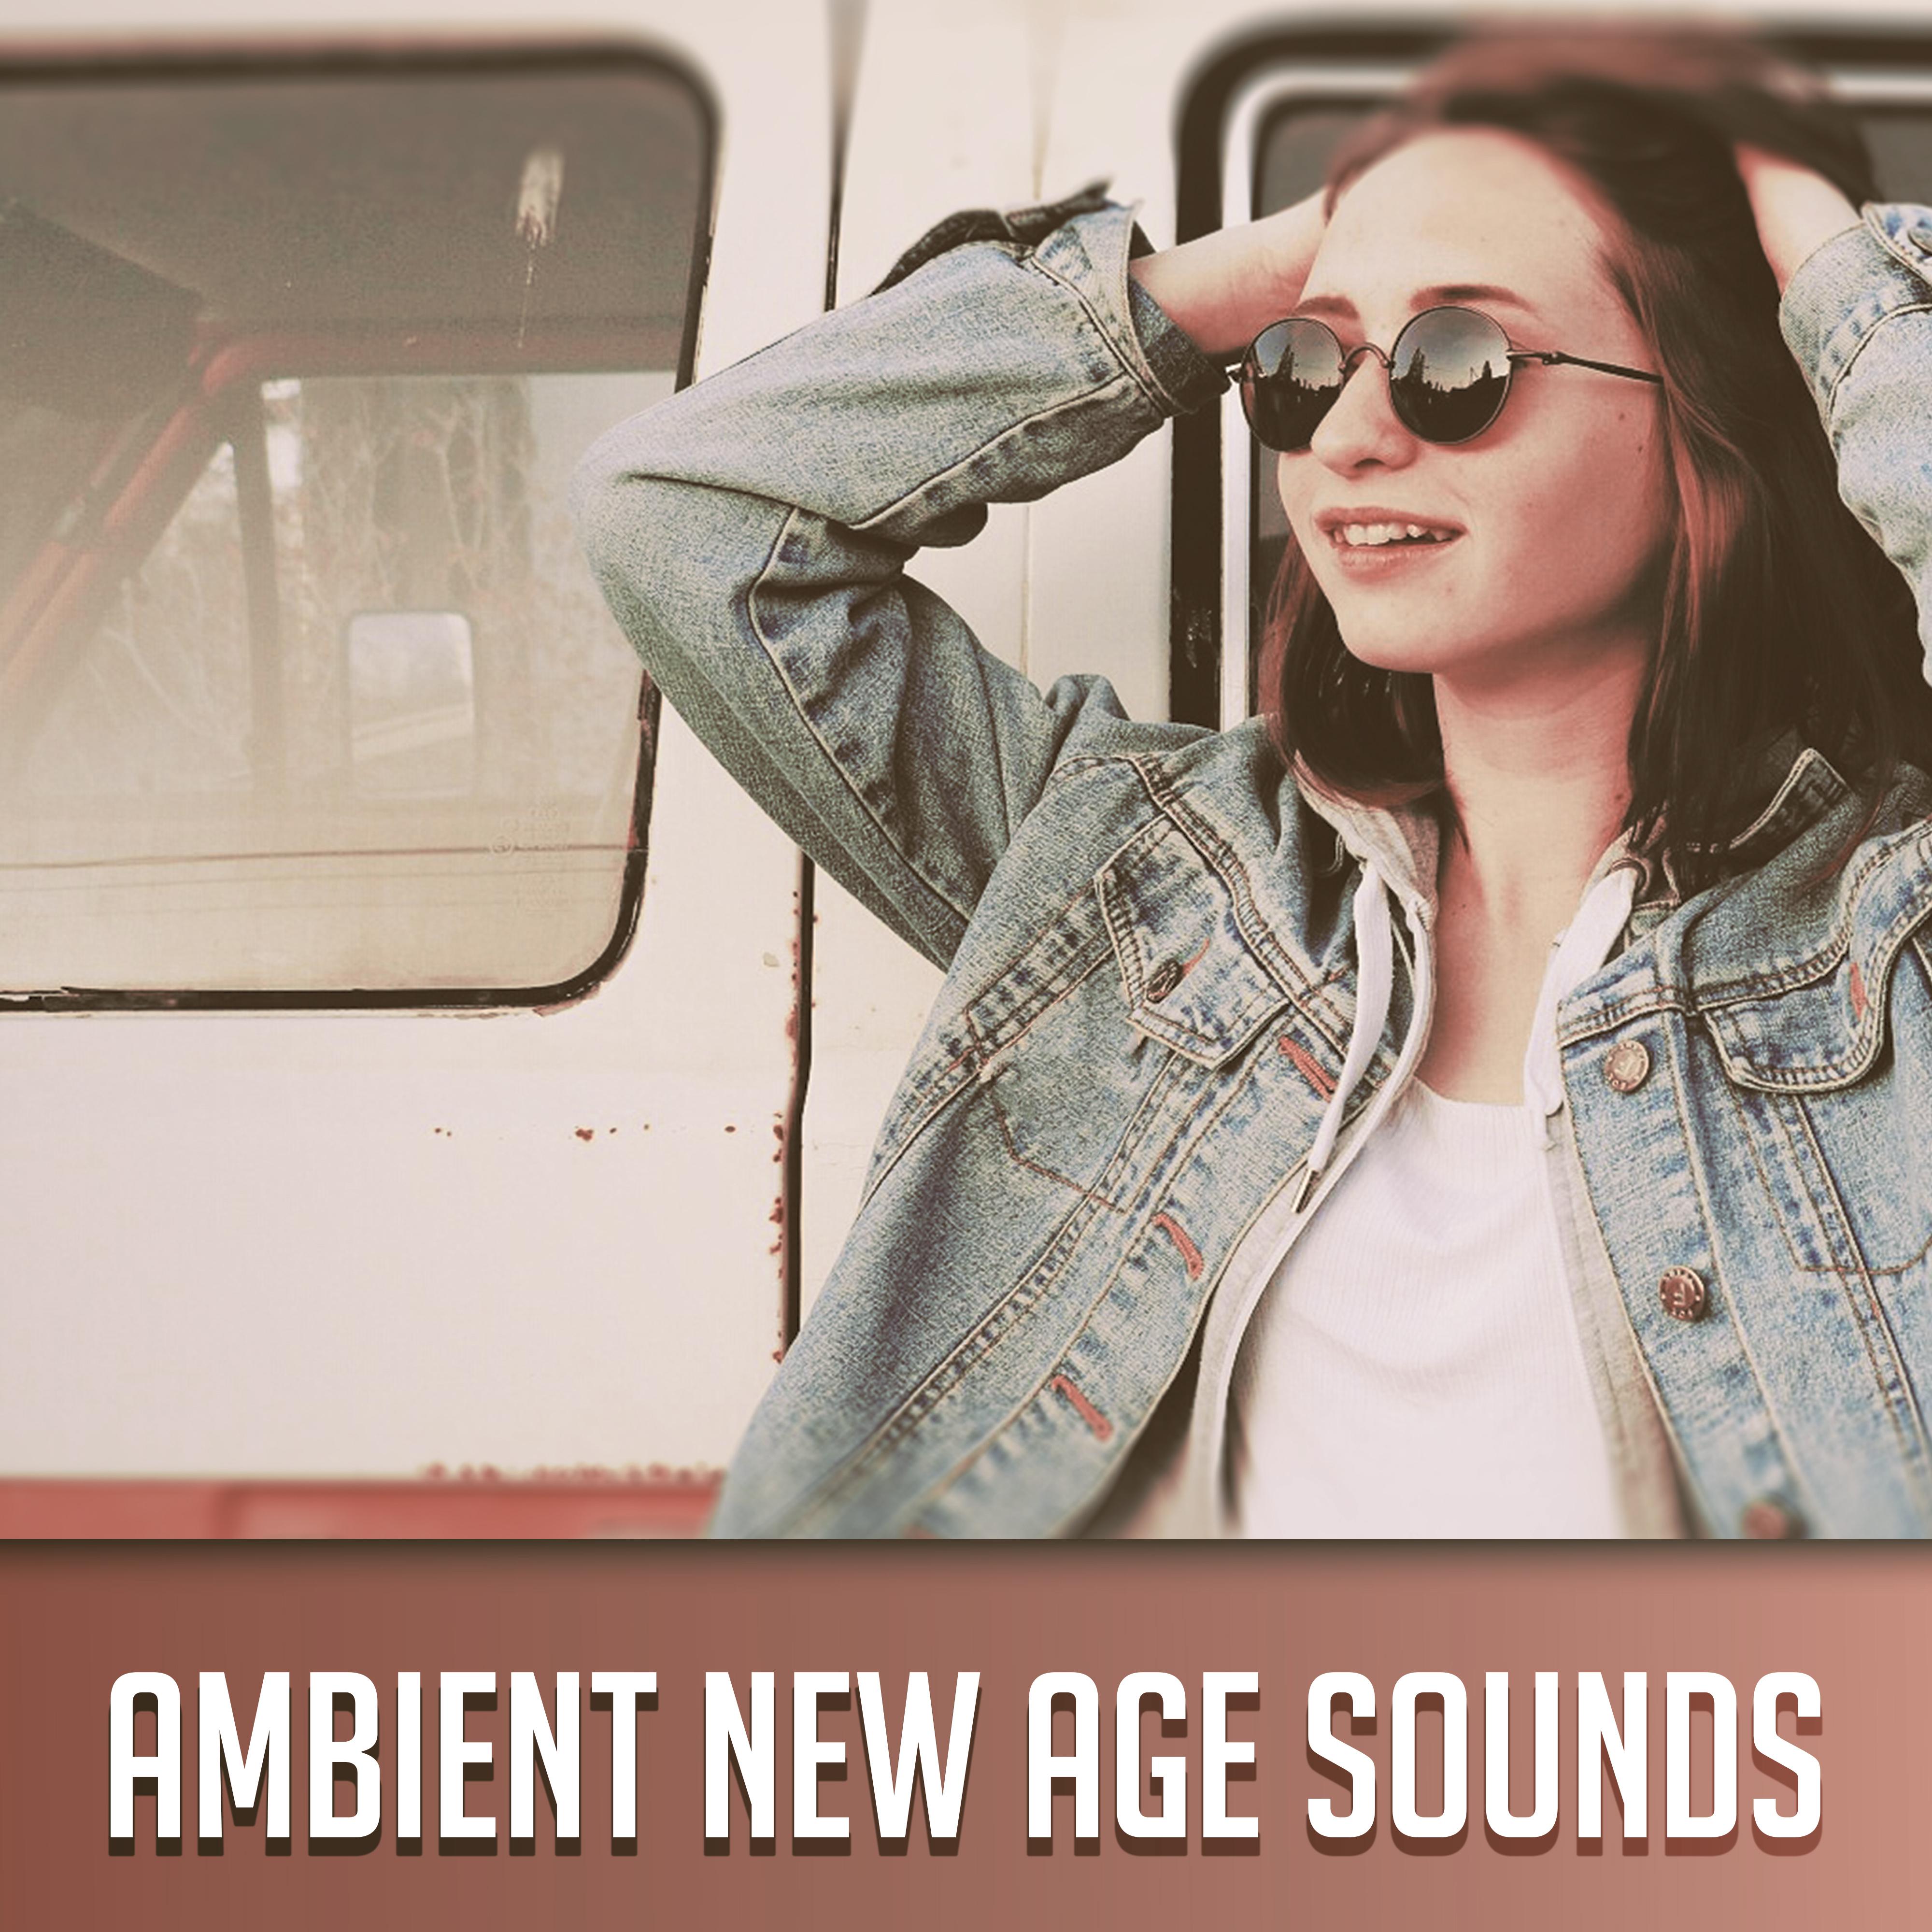 Ambient New Age Sounds  Calming Waves, No More Stress, Soothing Music to Relax, Rest Yourself